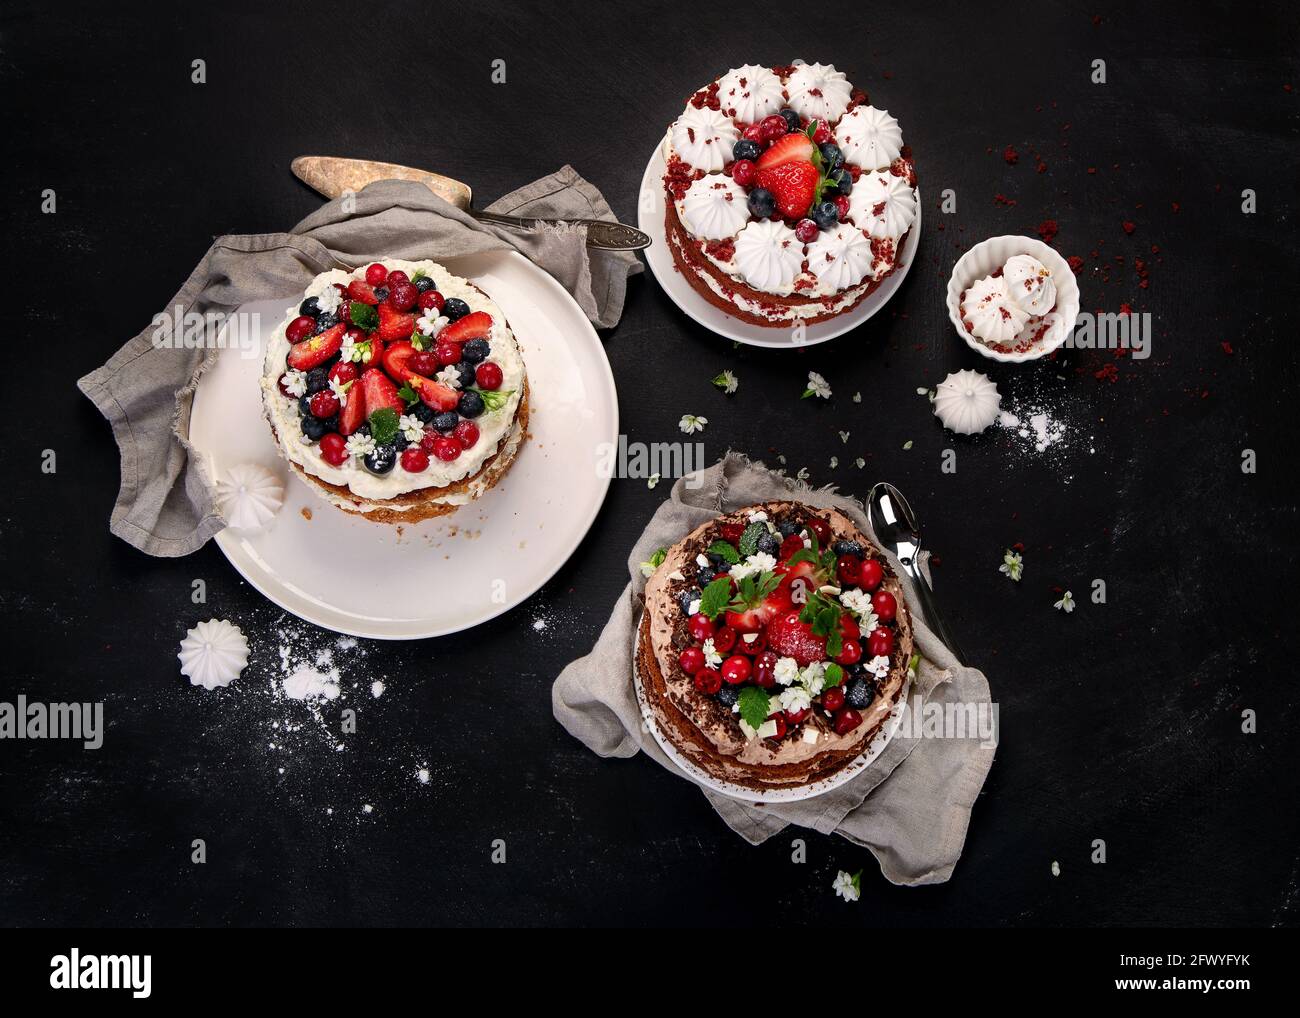 Assorted delicious and colorful homemade cakes with different type of filling on black background. Stock Photo